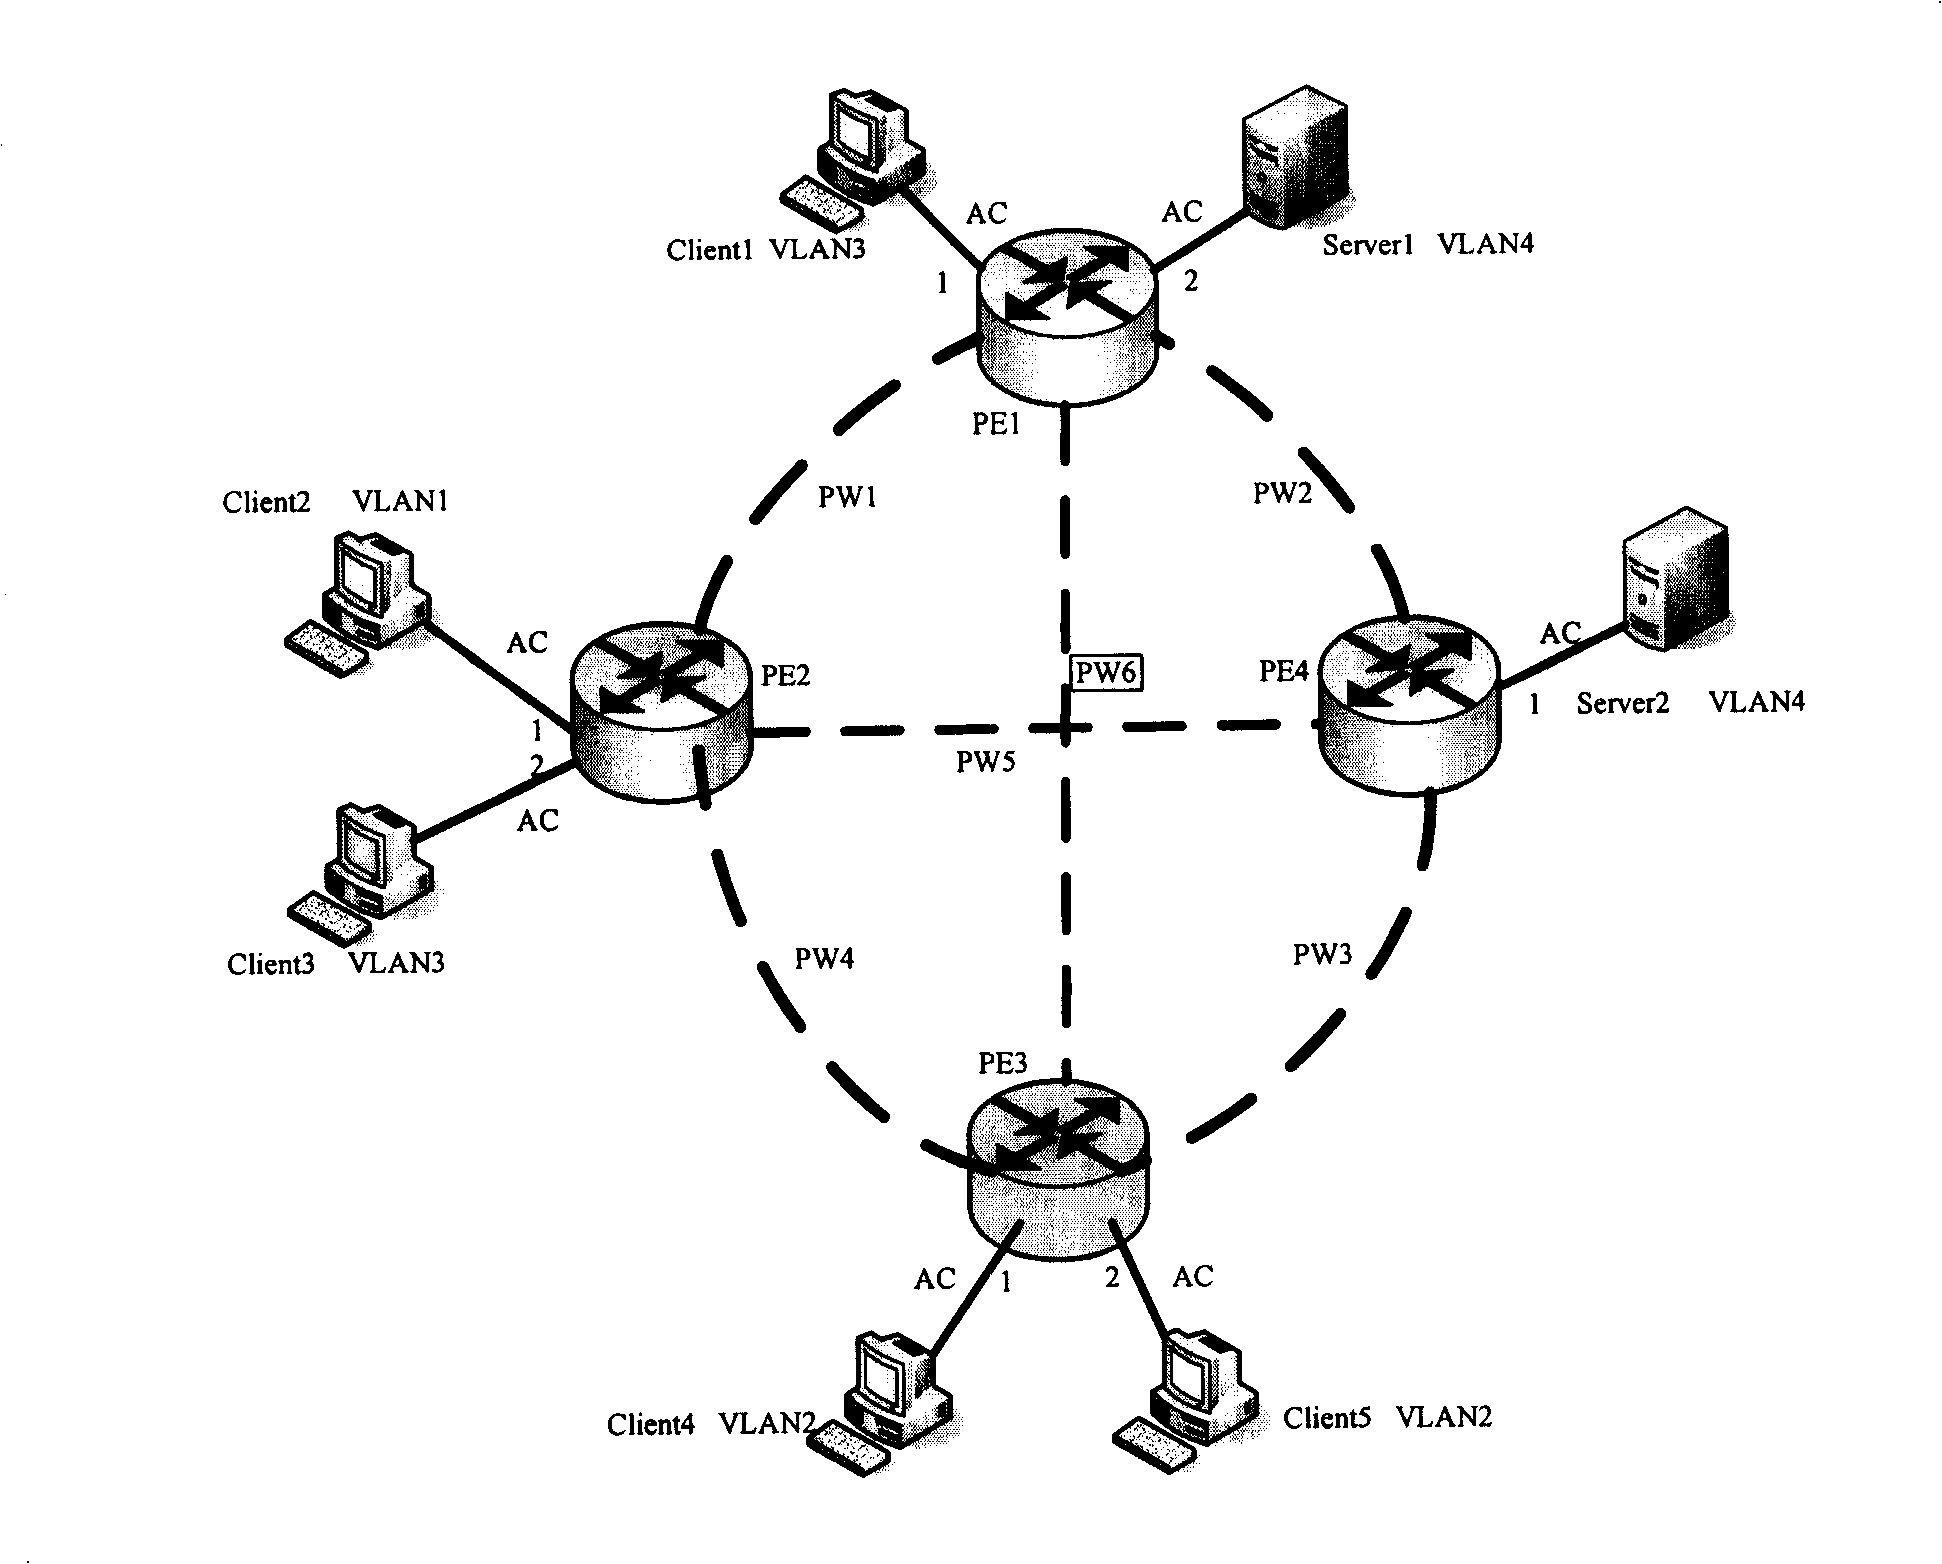 User grouping intercommunication/isolation device in virtual special network service